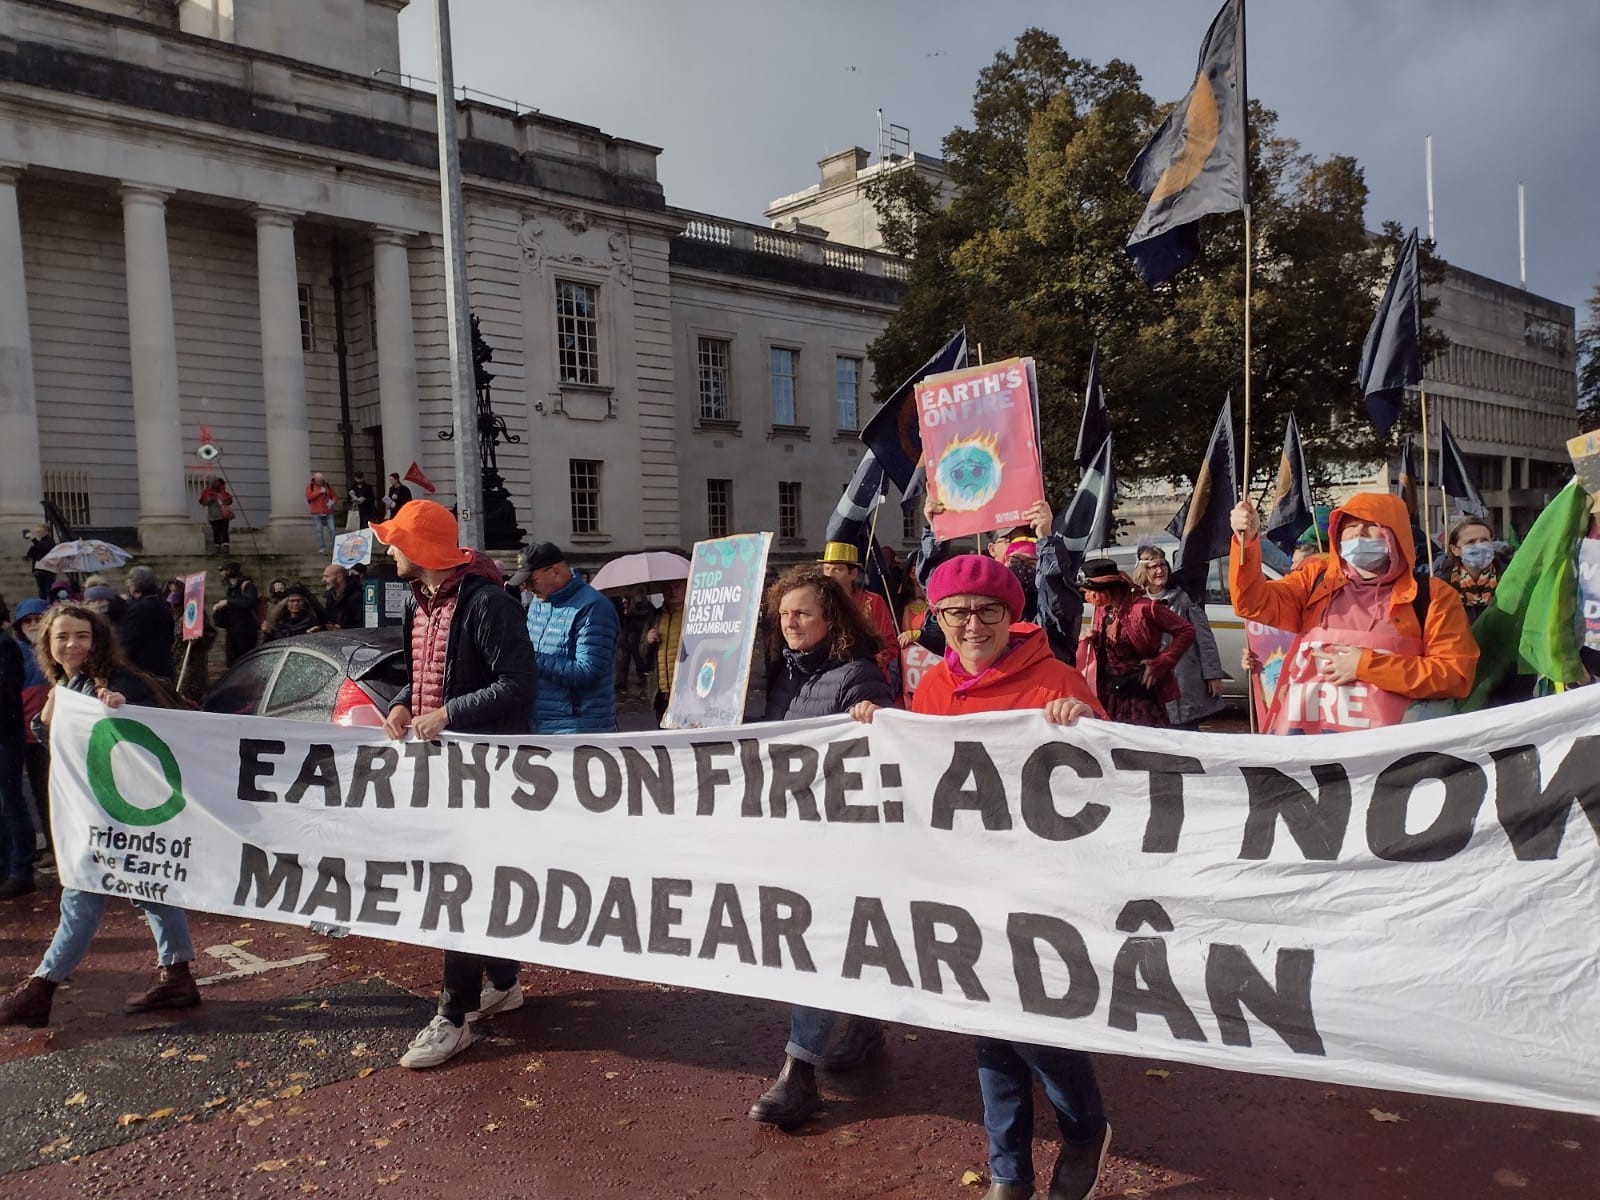 Cardiff Friends of the Earth outside the National Museum of Wales on the Global Day of Action for the Climate, 6 November 2020